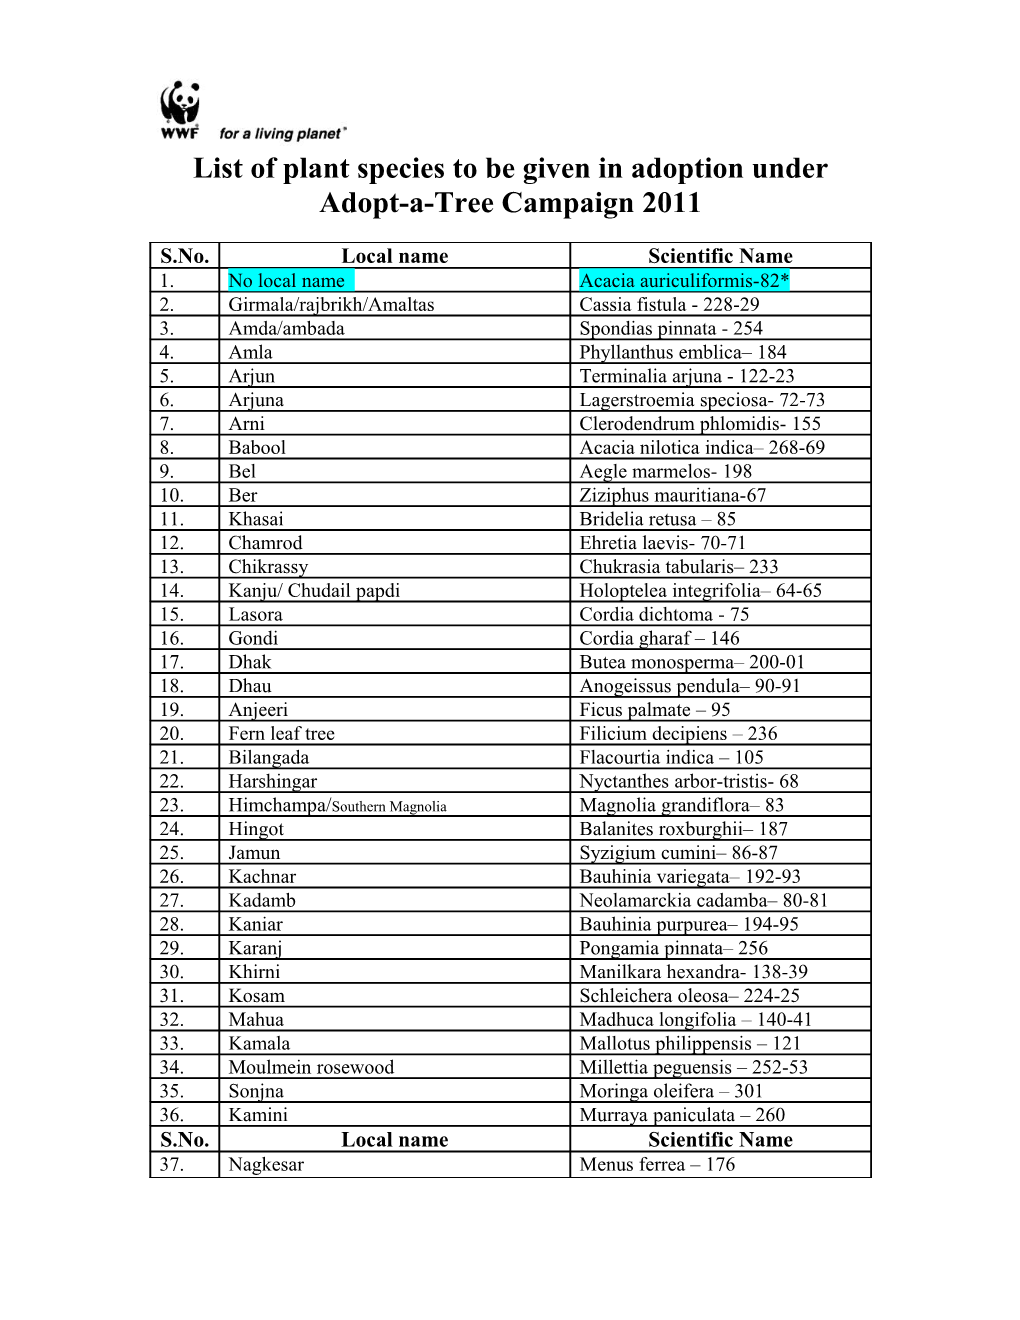 List of Plant Species to Be Adopted for Adopt a Plant Campaign- 2008